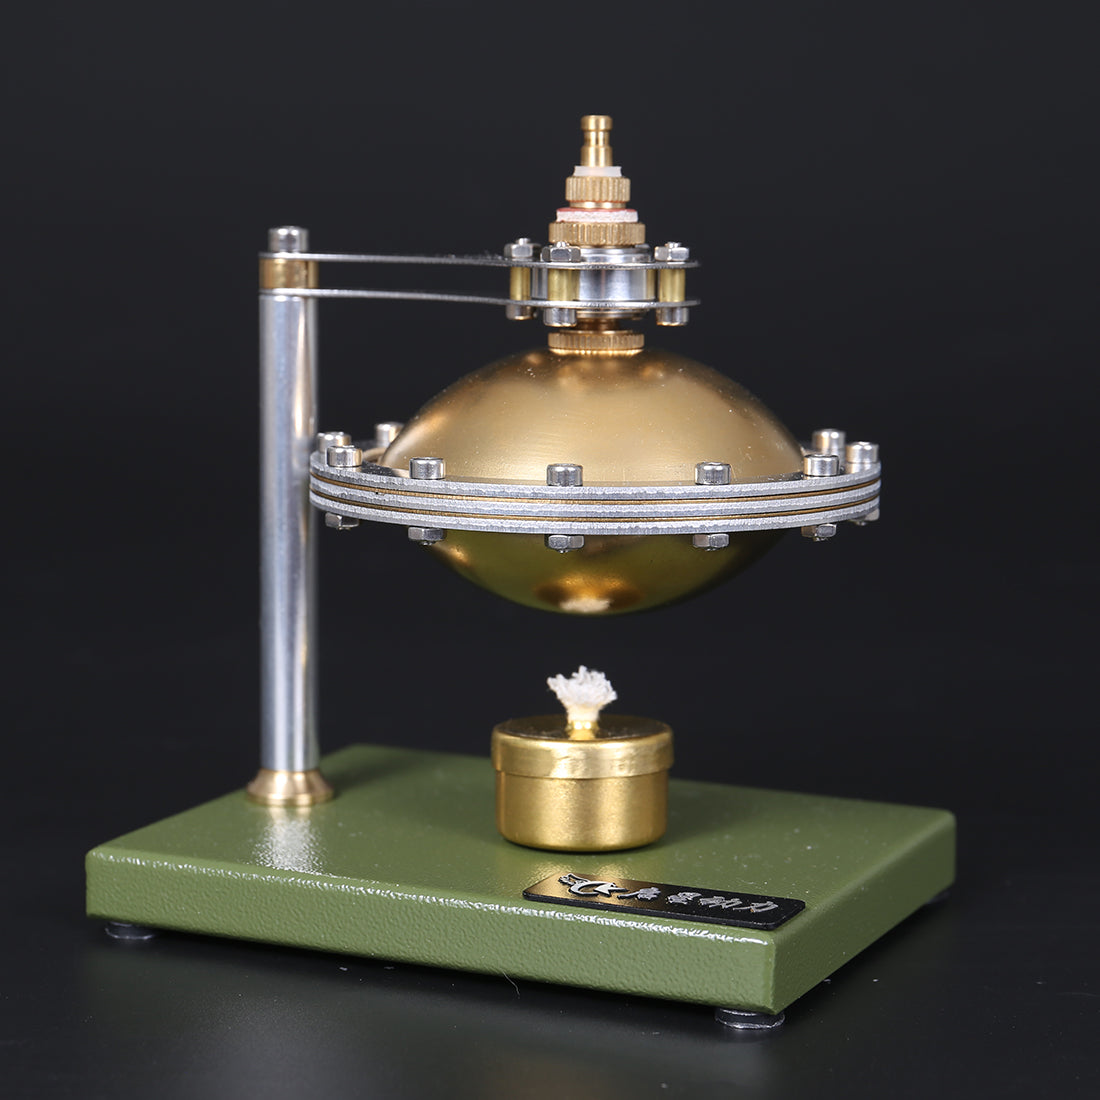 UFO Spin Suspension Steam Engine Model DIY Engine Kit with Copper Boiler and Alcohol Lamp - enginediy